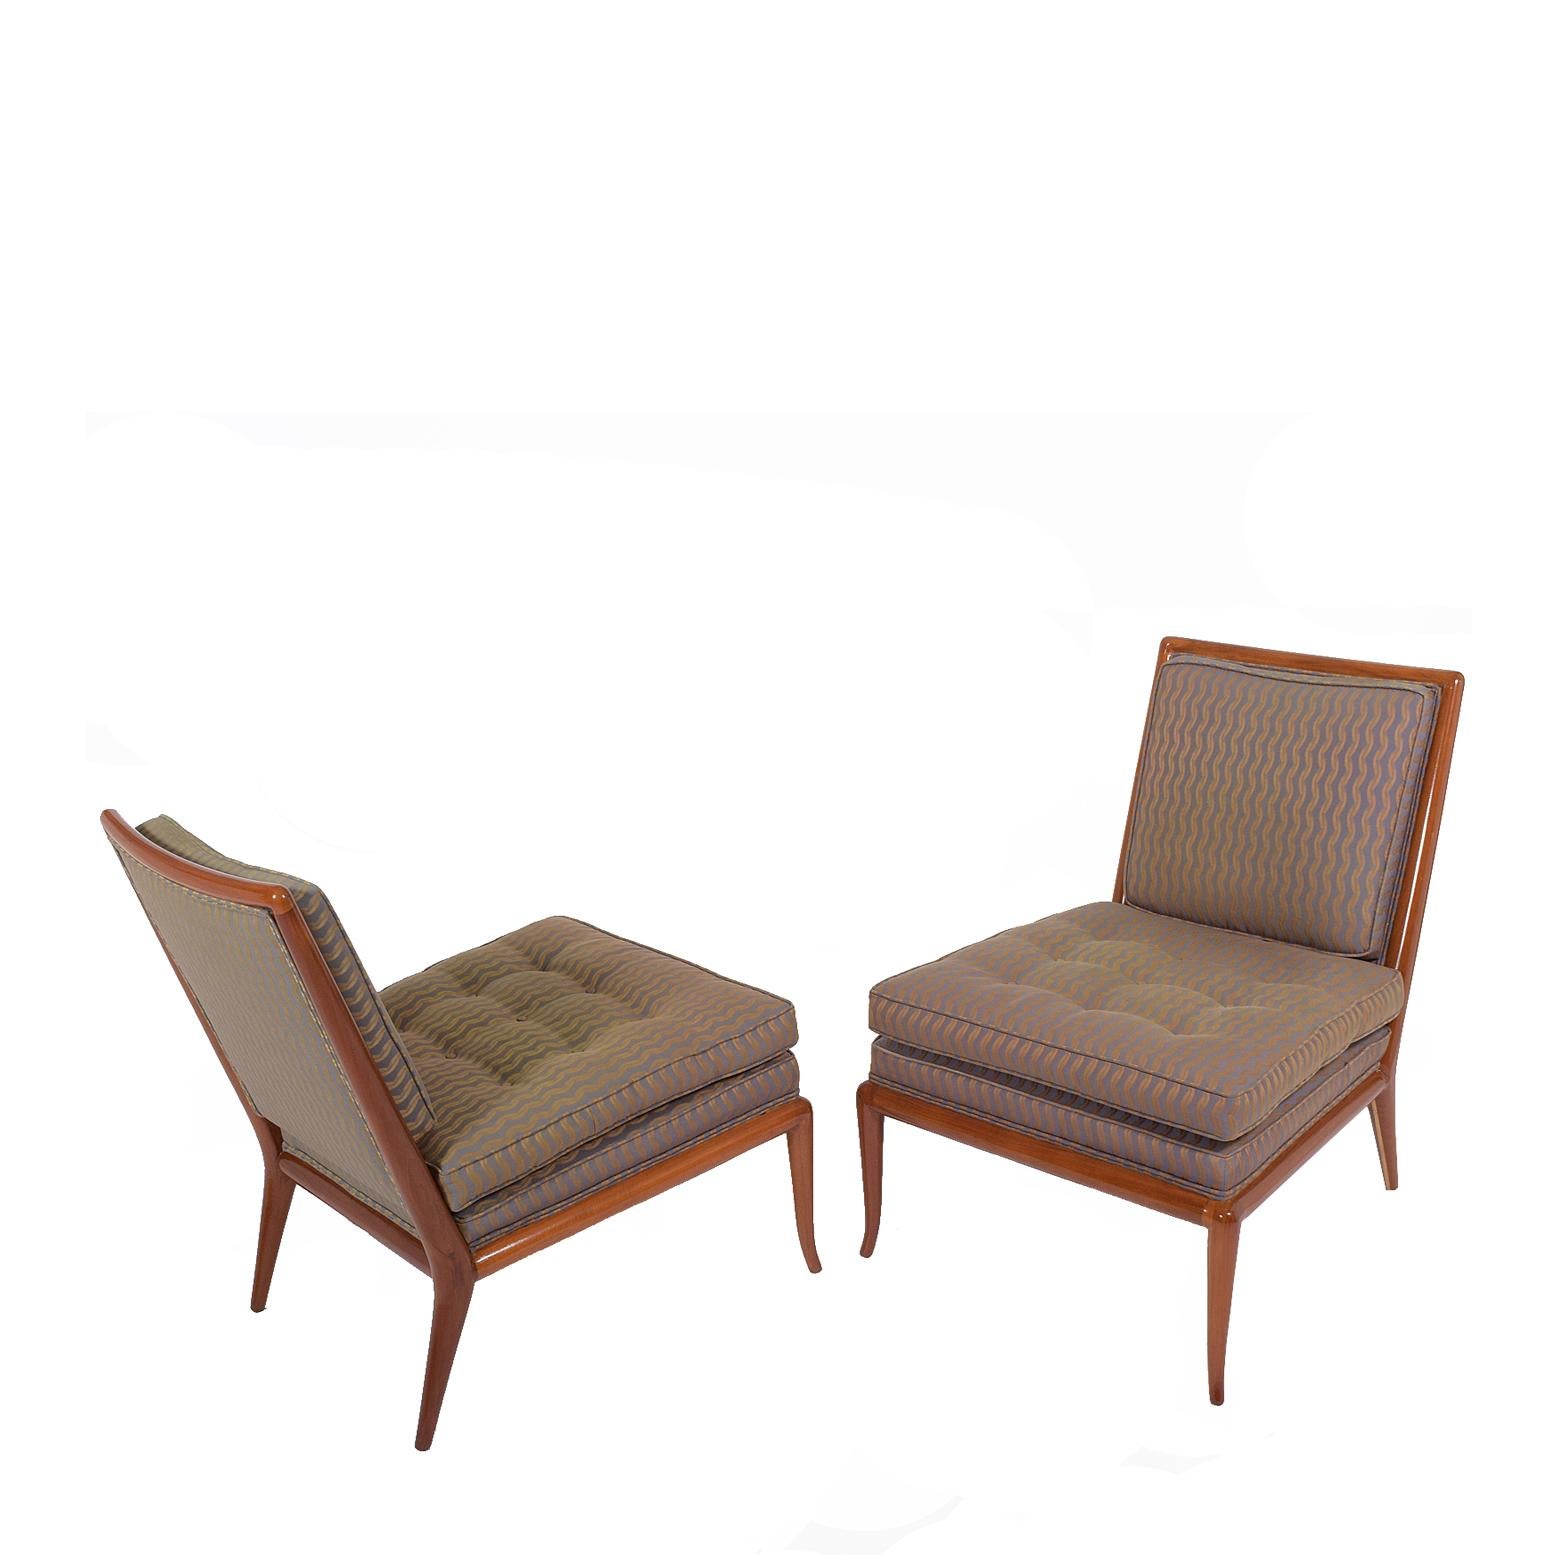 Model WMB slippers chairs pair lose coutions on the seat upholstered in Jack Lenor Larsen fabric made by Widdicomb Furniture Co.